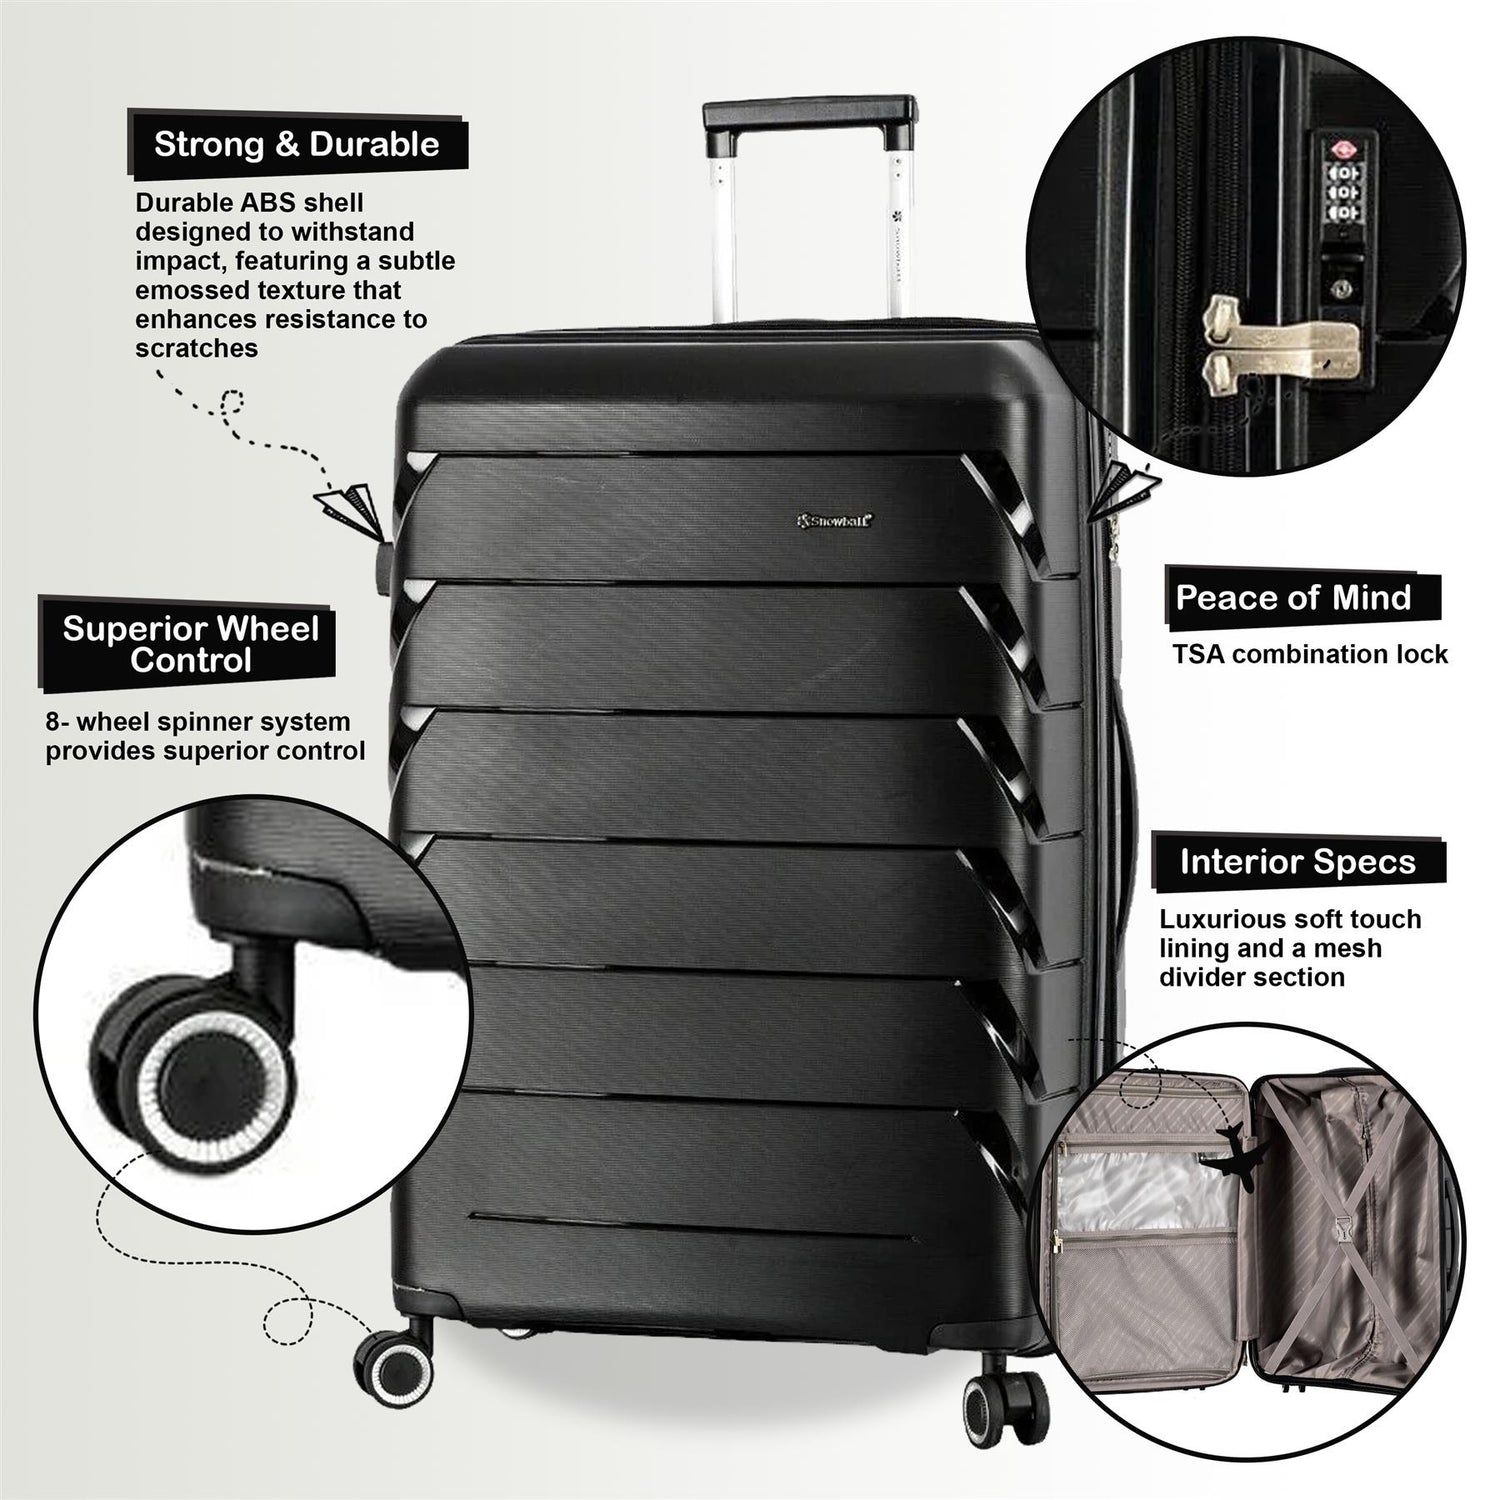 Camden Set of 3 Hard Shell Suitcase in Black